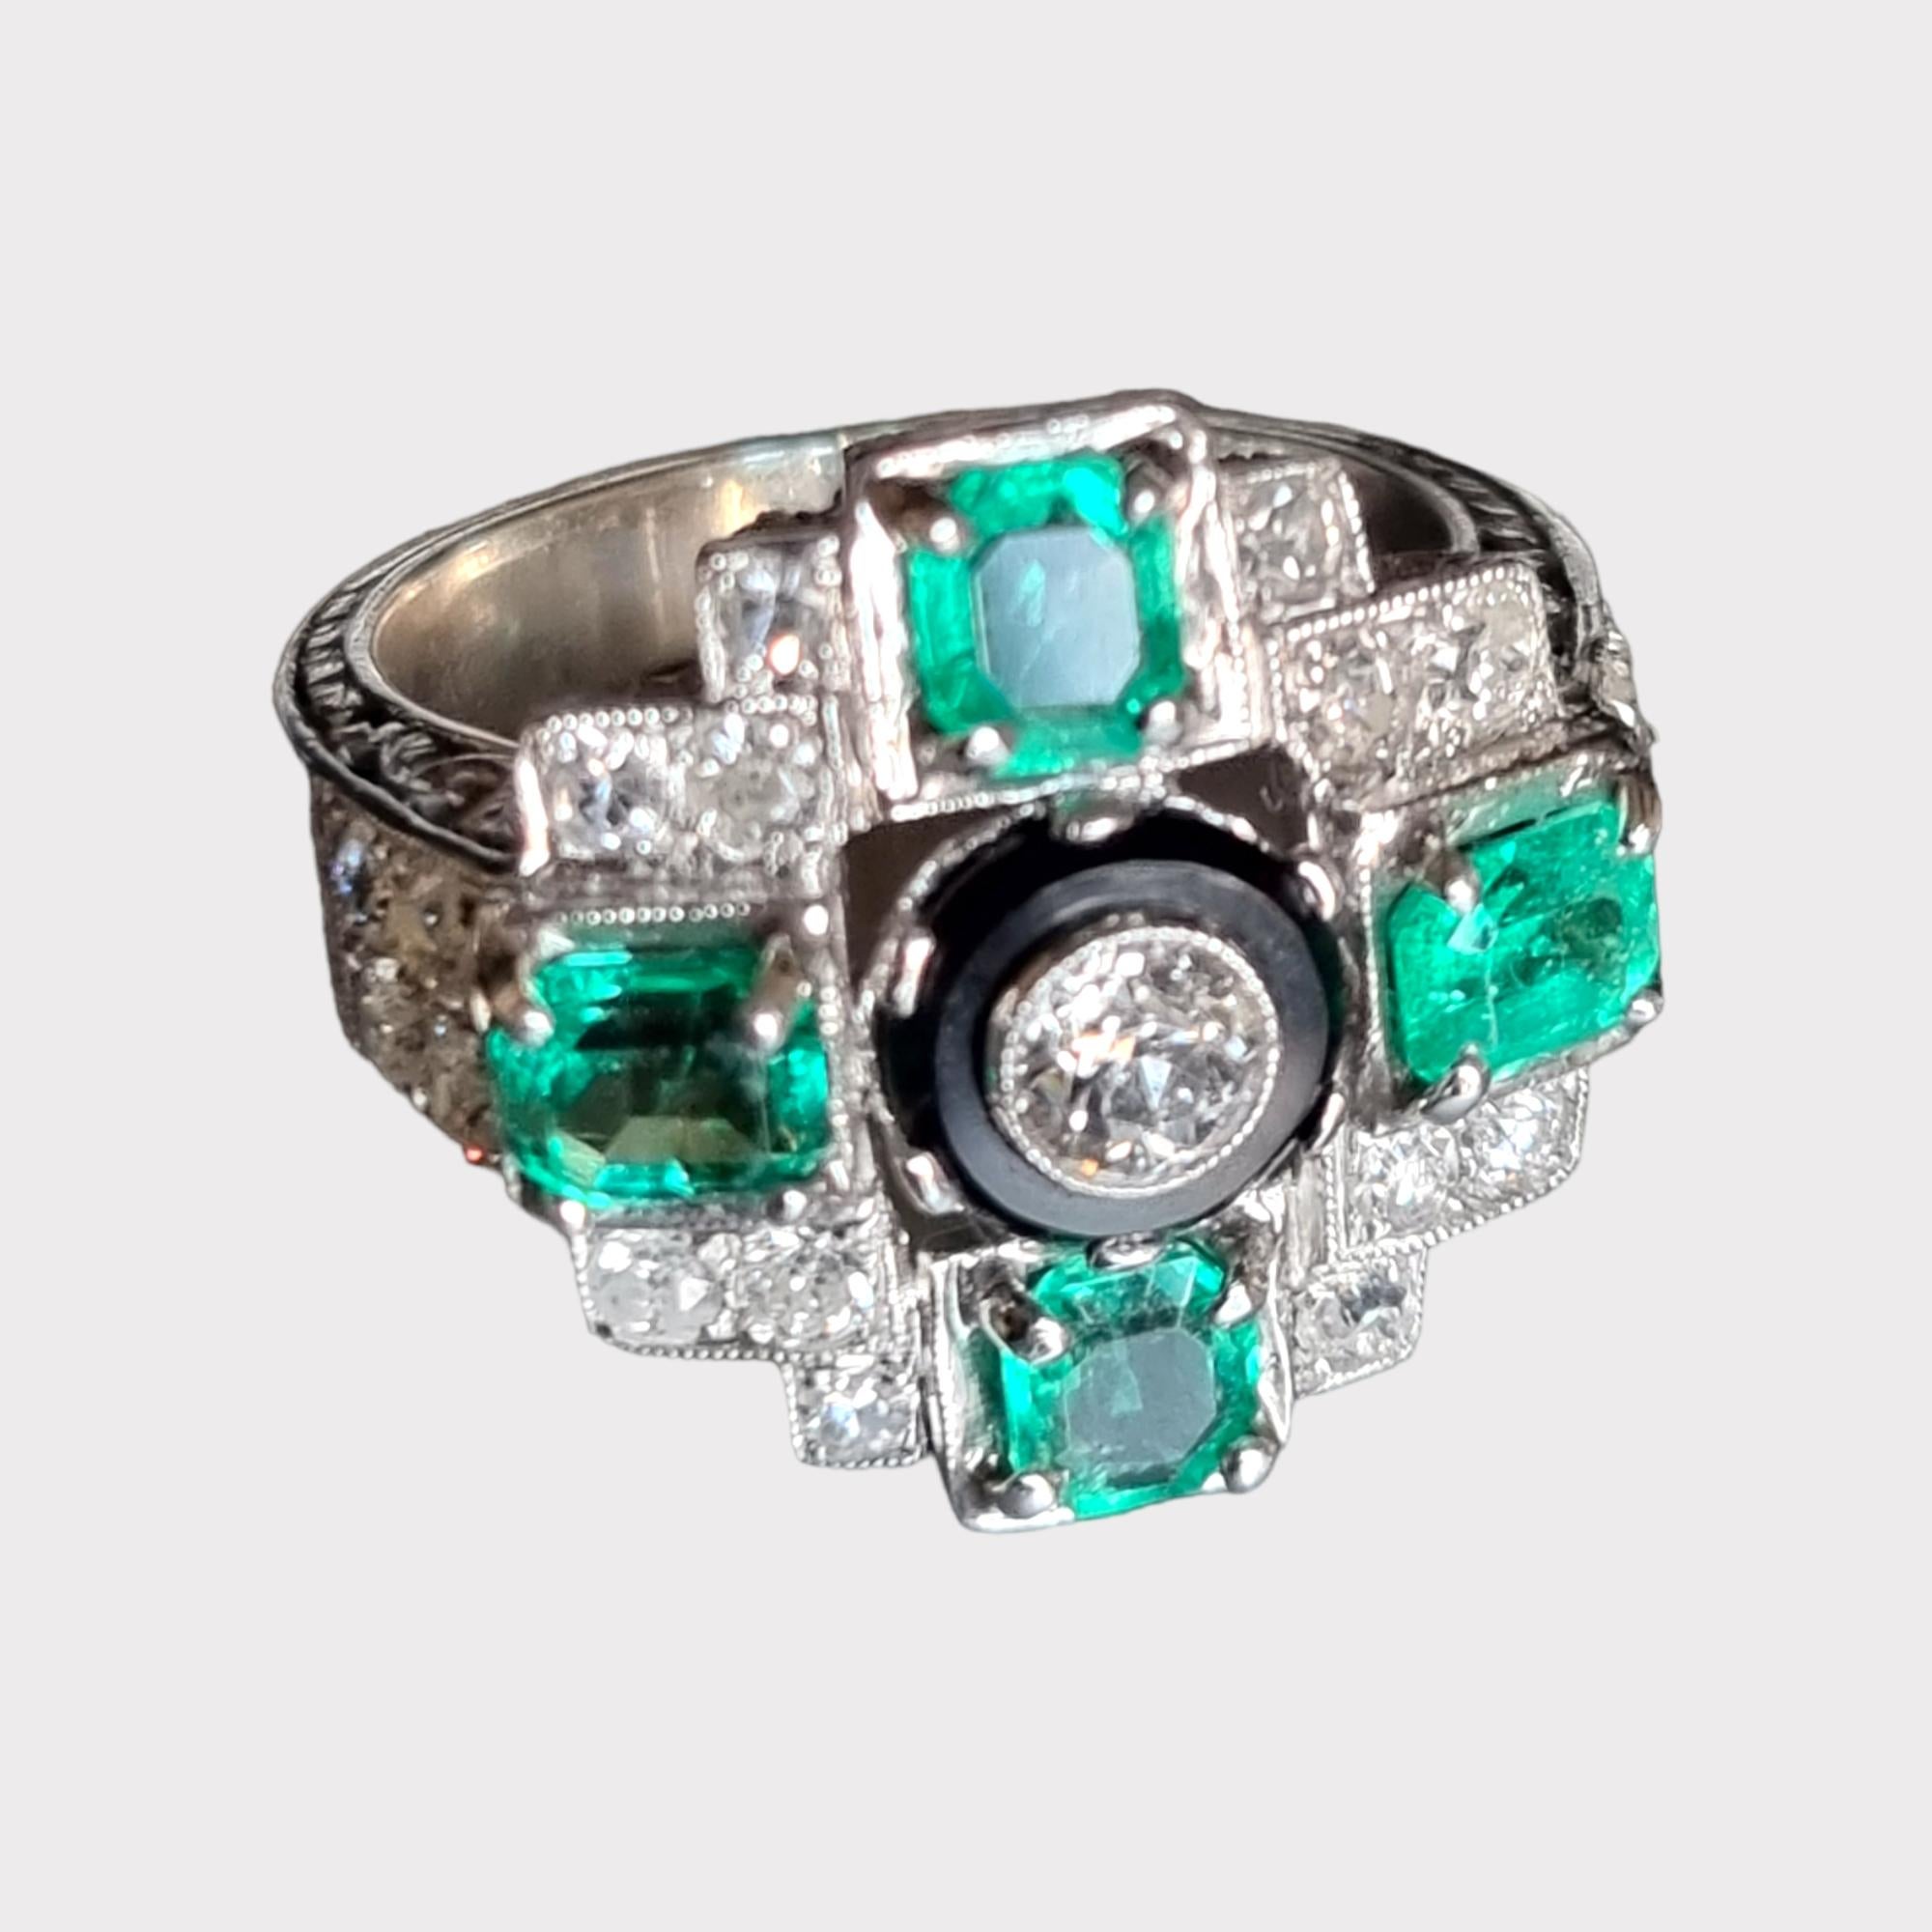 Art-Deco Style Cross Shaped  Design Emerald, Diamond  and Onyx Cocktail Ring.
This stunning cocktail ring shines with an undeniable opulence mounted in 950 platinum. The pierce decorated  as a cross shaped cluster design is embellished with an